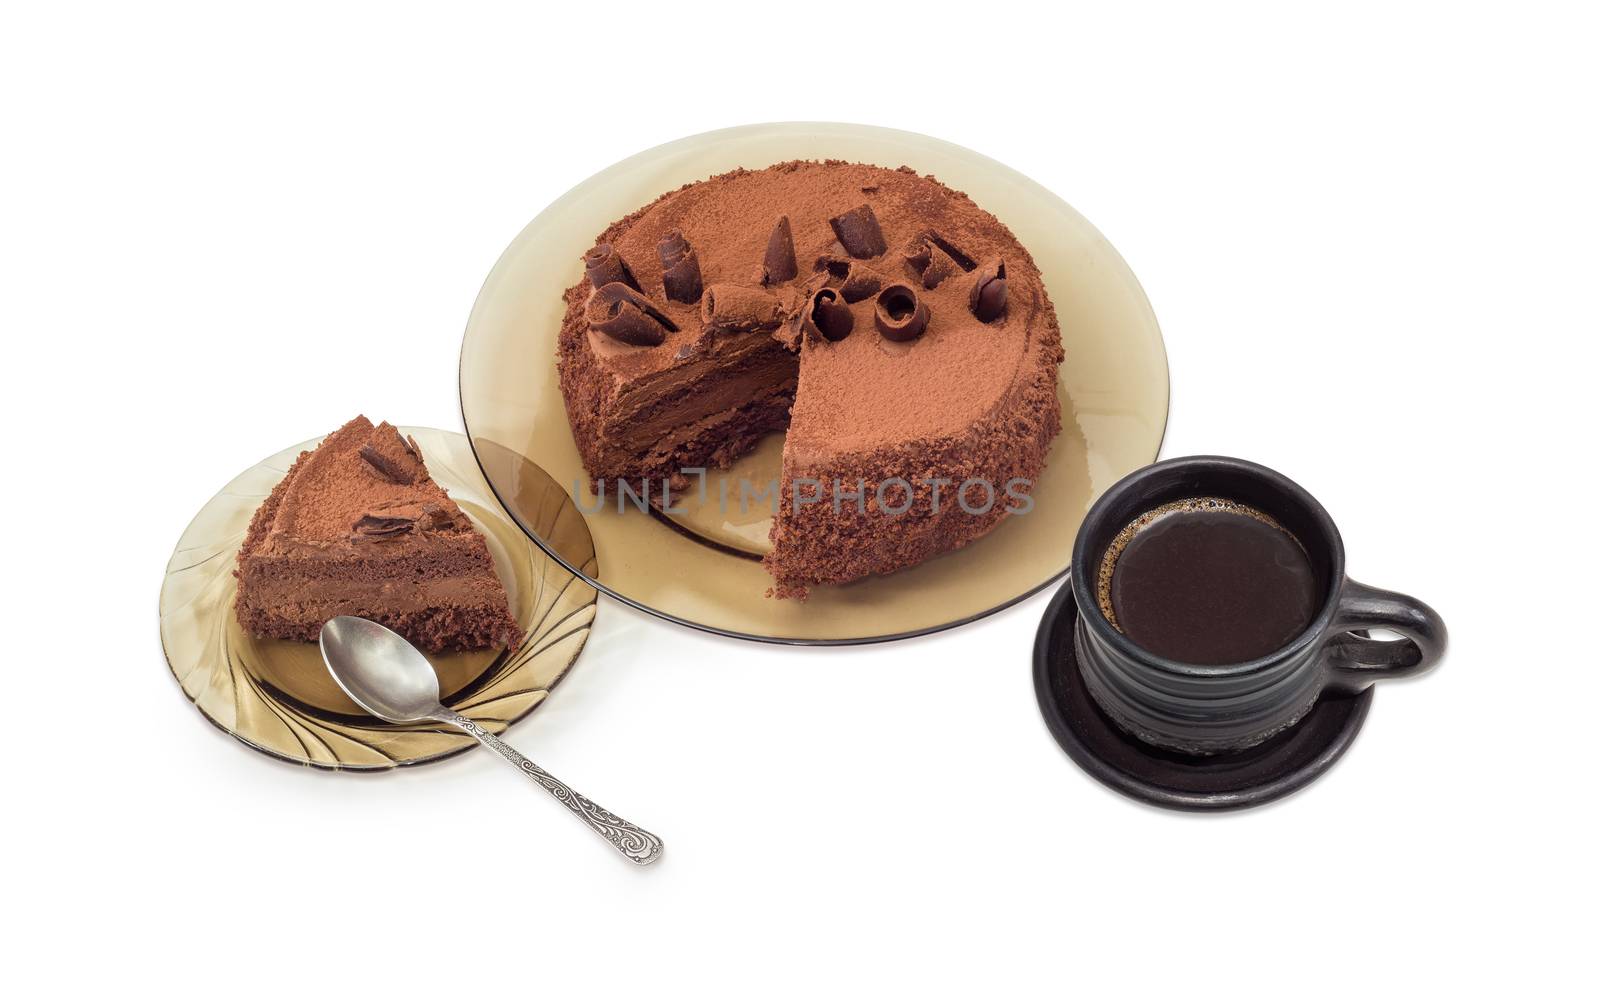 Partly sliced chocolate cake decorated with chocolate chips and cocoa powder on the glass dish, slice cake on saucer with spoon and black coffee in black ceramic cup on a light background
